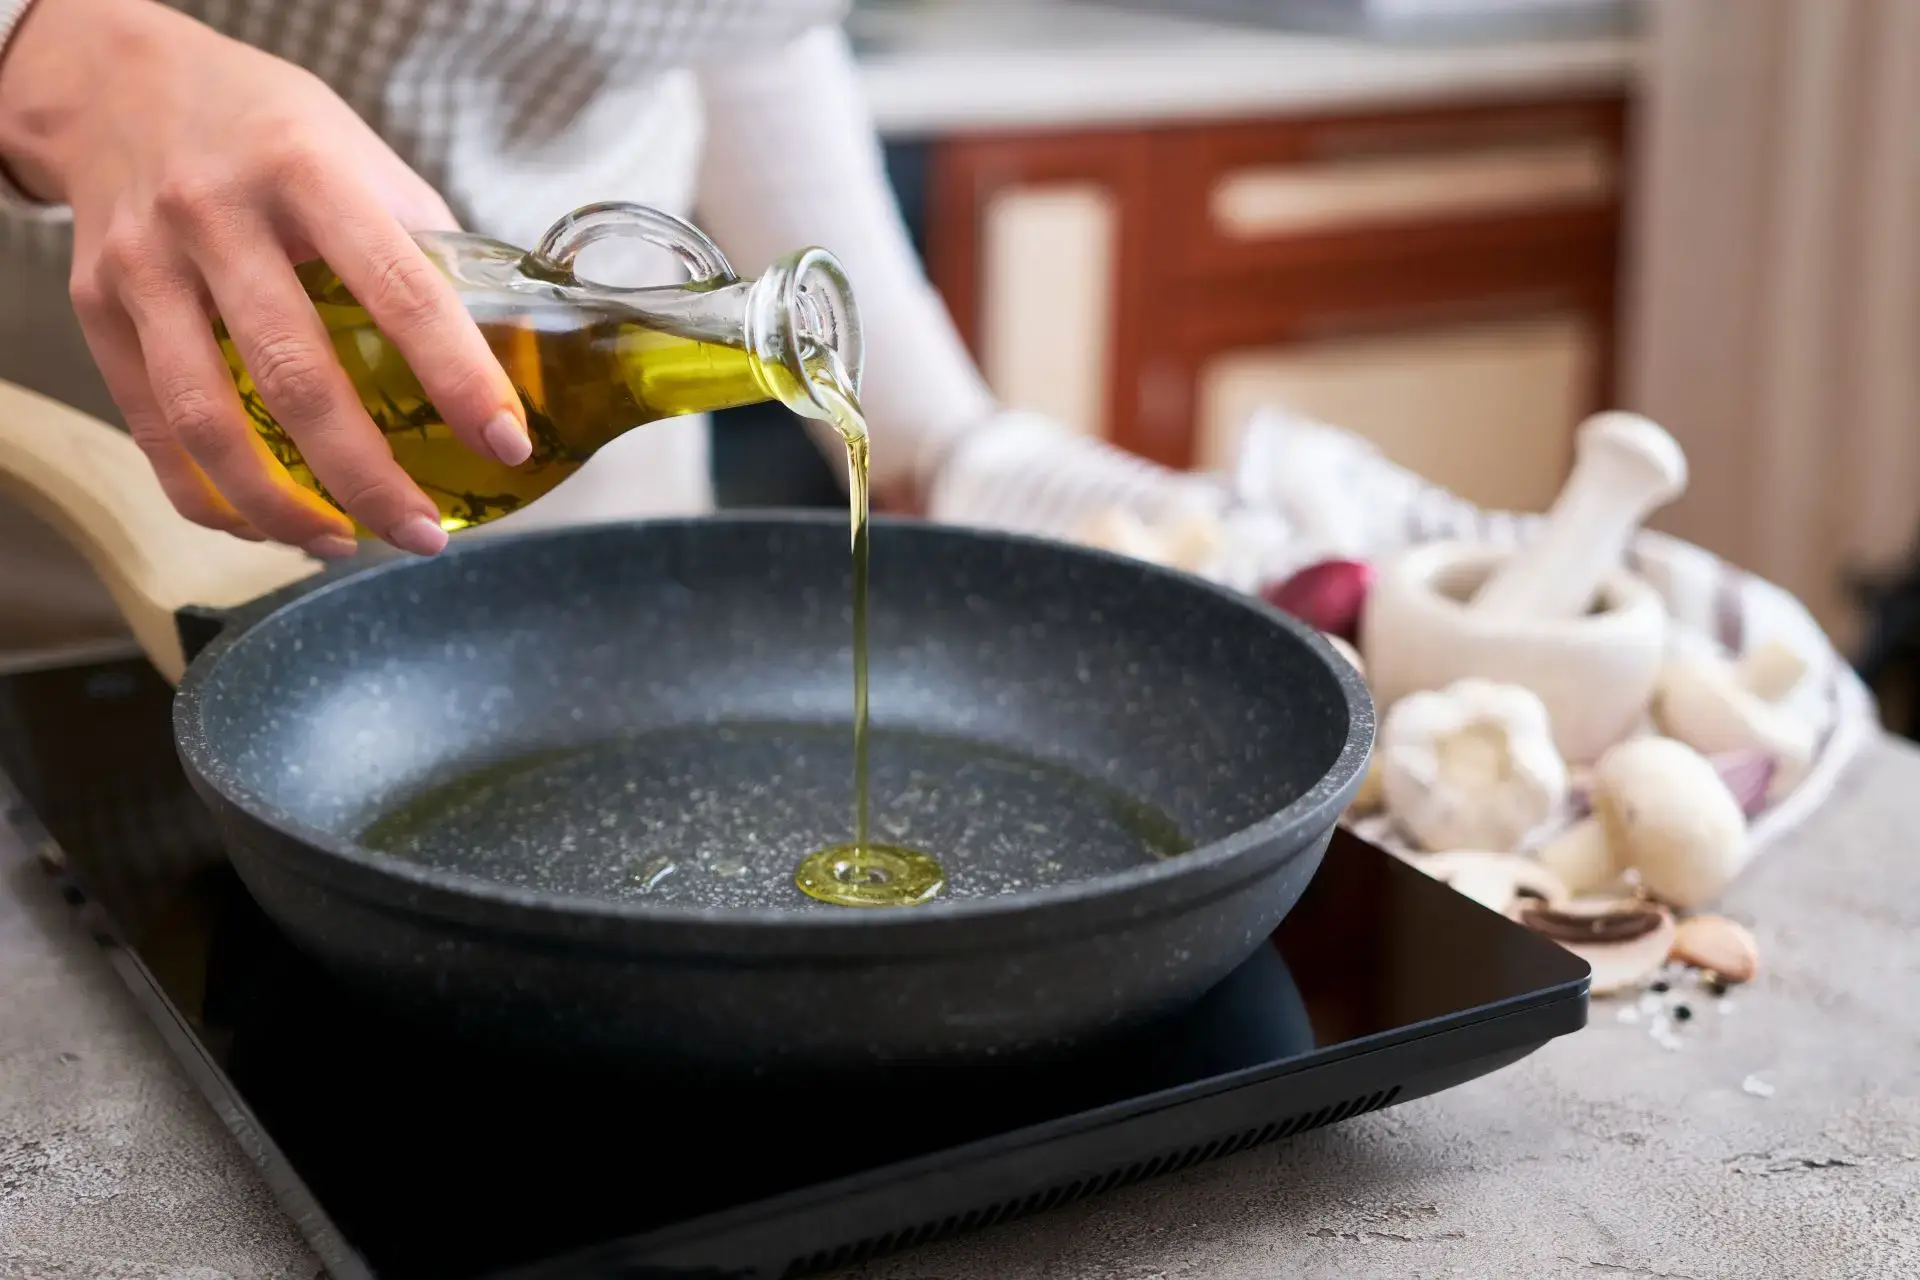 How to Choose the Best Frying Oil? The Perfect Oil for Every Dish